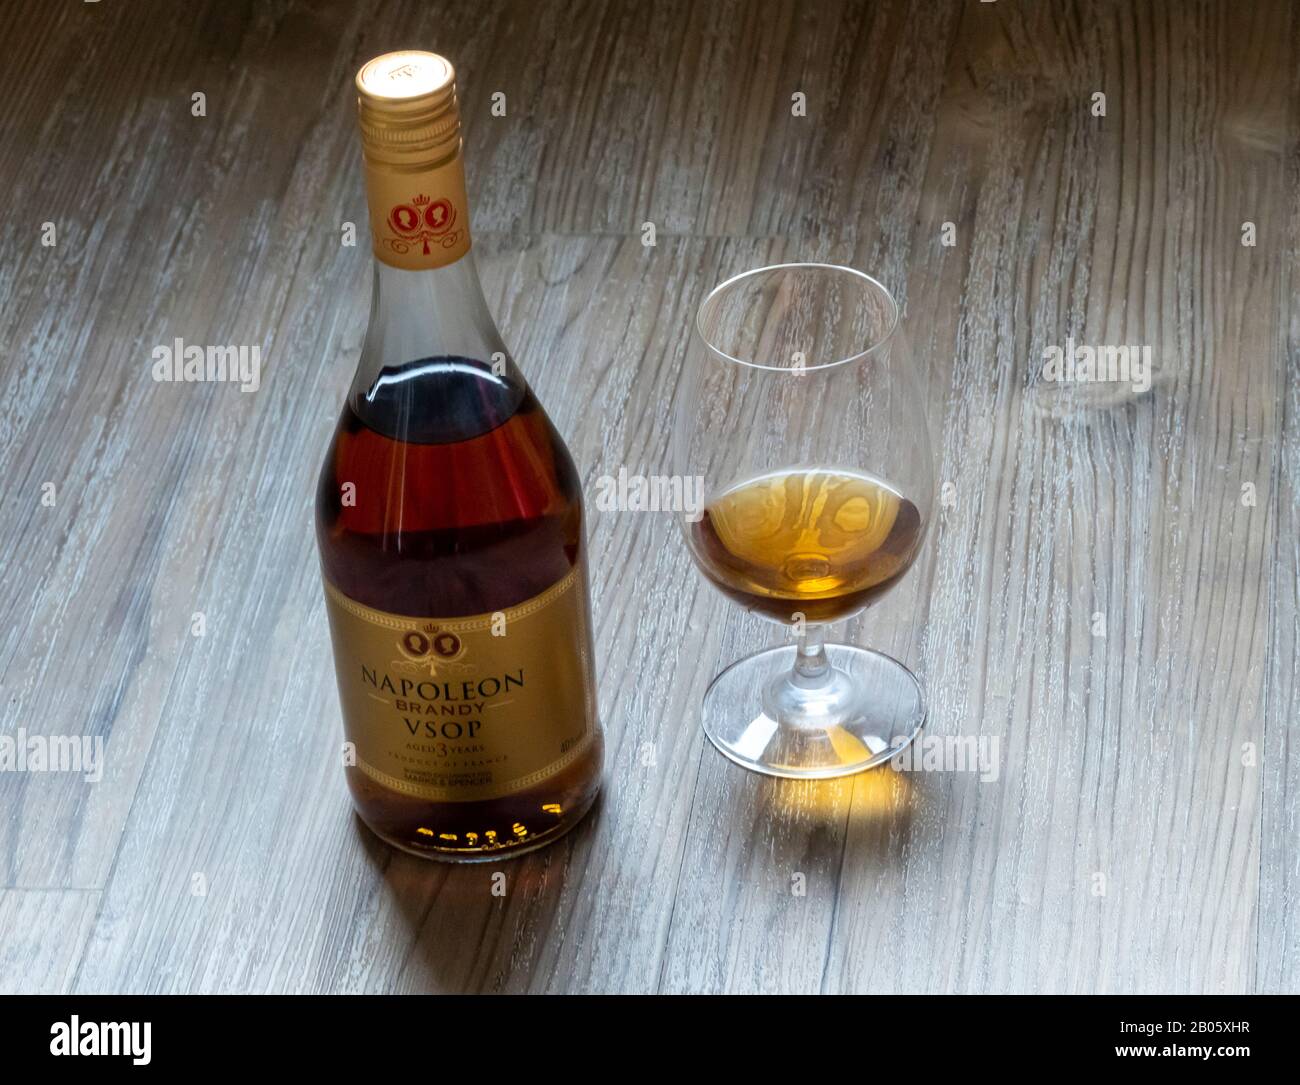 Bottle and snifter of Napoleon Brandy on a wooden table Stock Photo